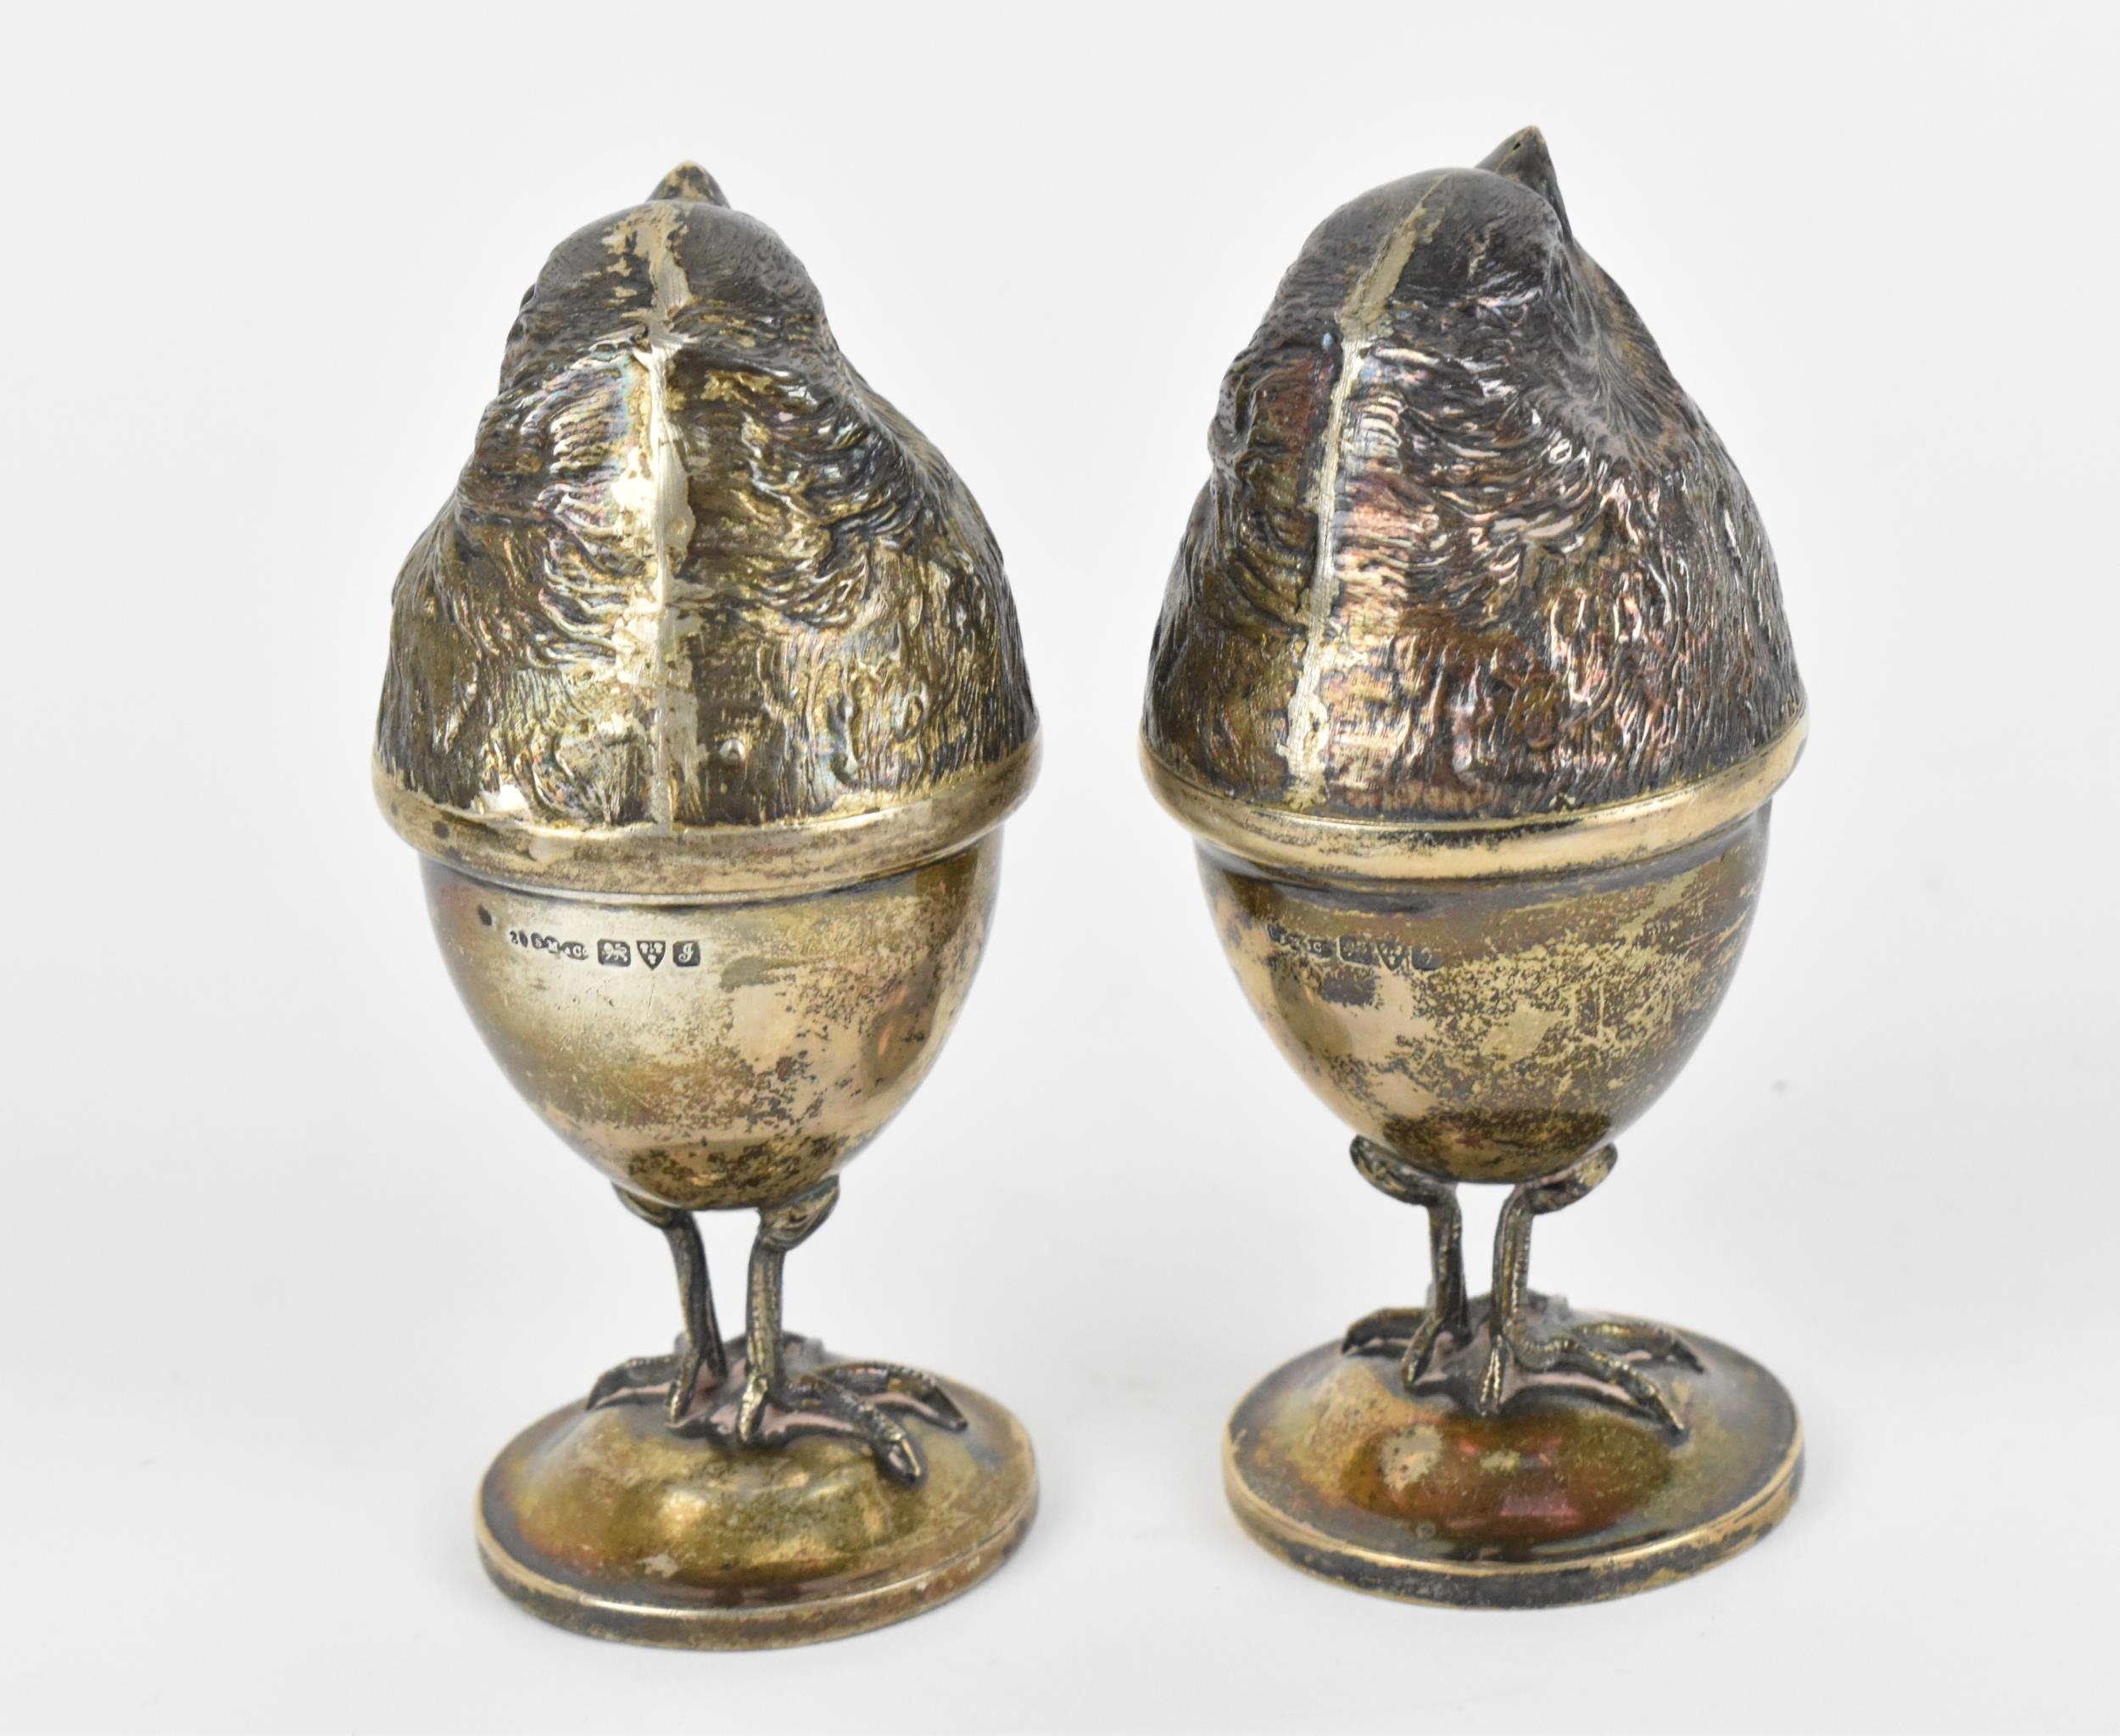 Two Edwardian silver novelty egg cups by Sampson Mordan & Co Ltd, Chester 1909, modelled as - Image 4 of 8